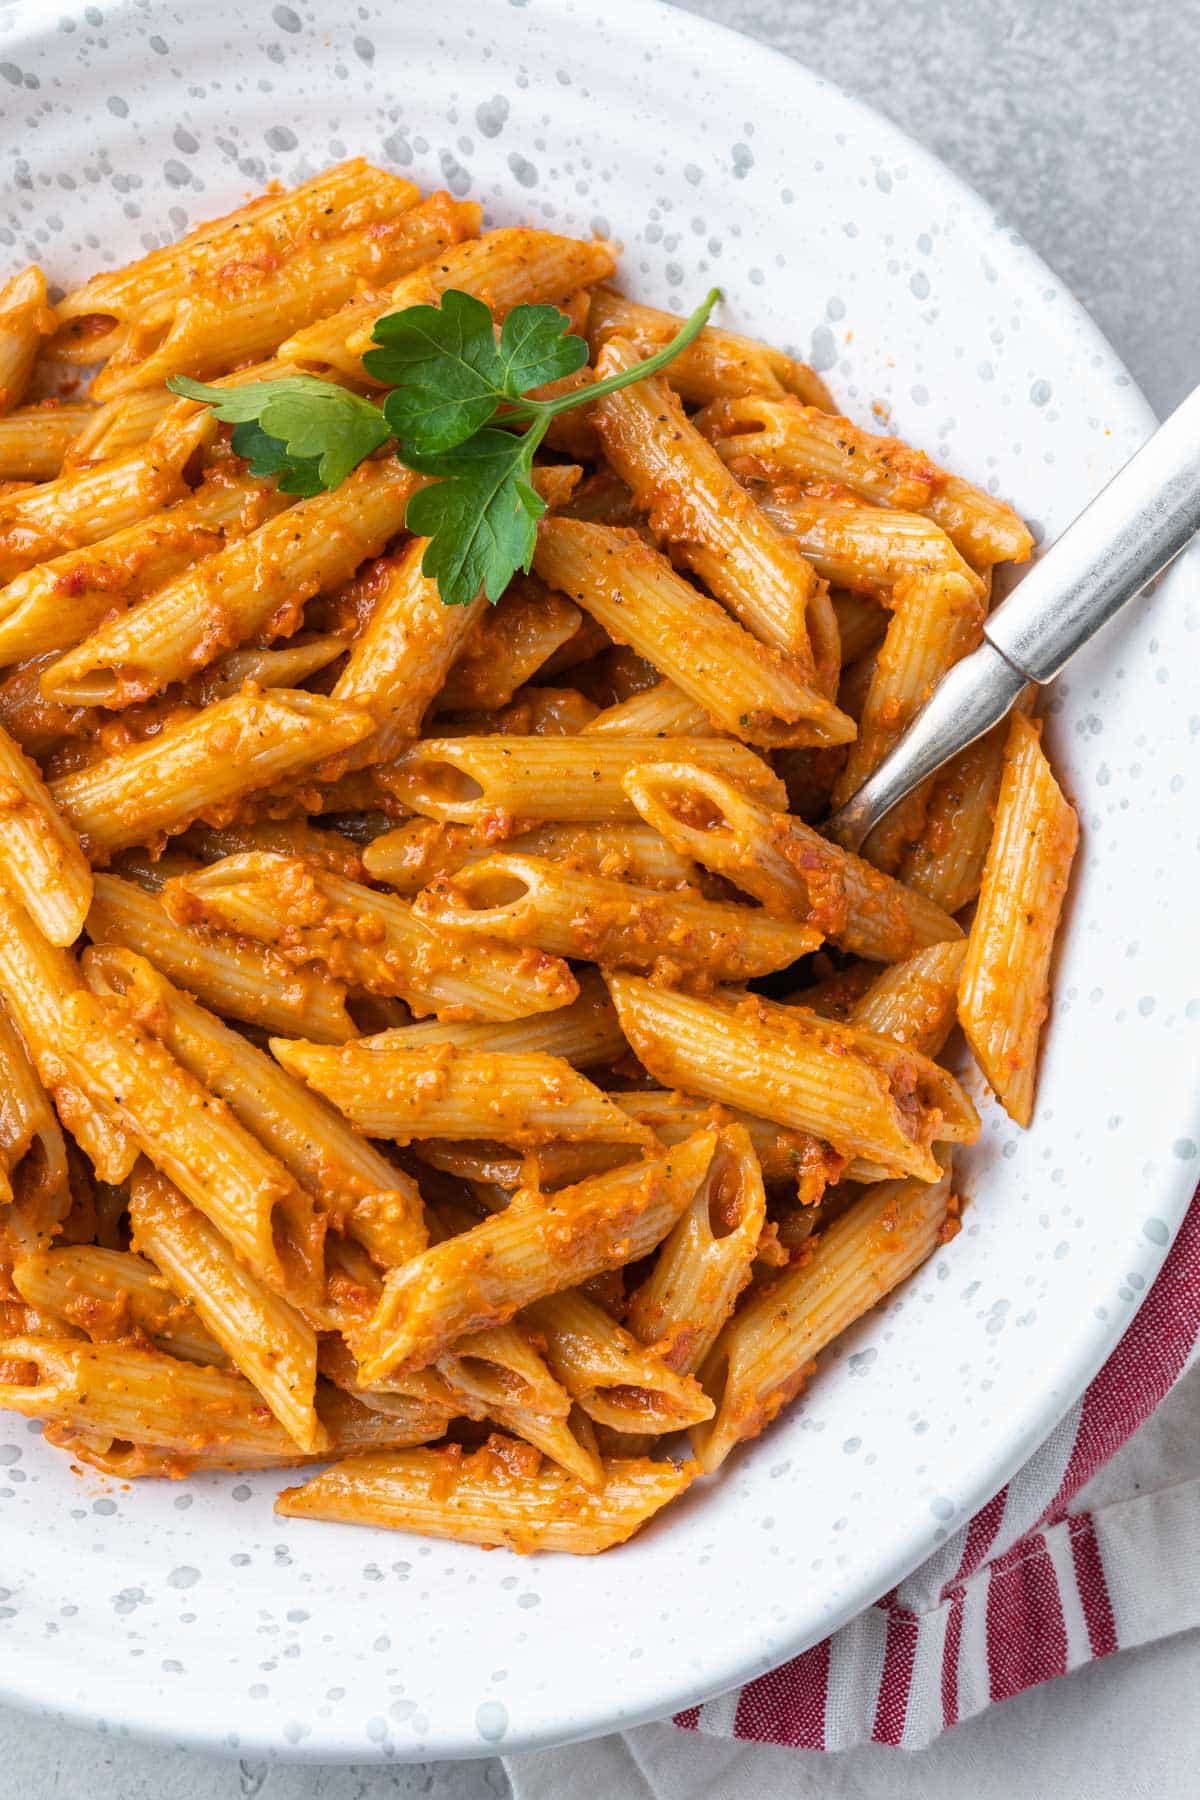 A bowl of pasta in a red pesto sauce. 